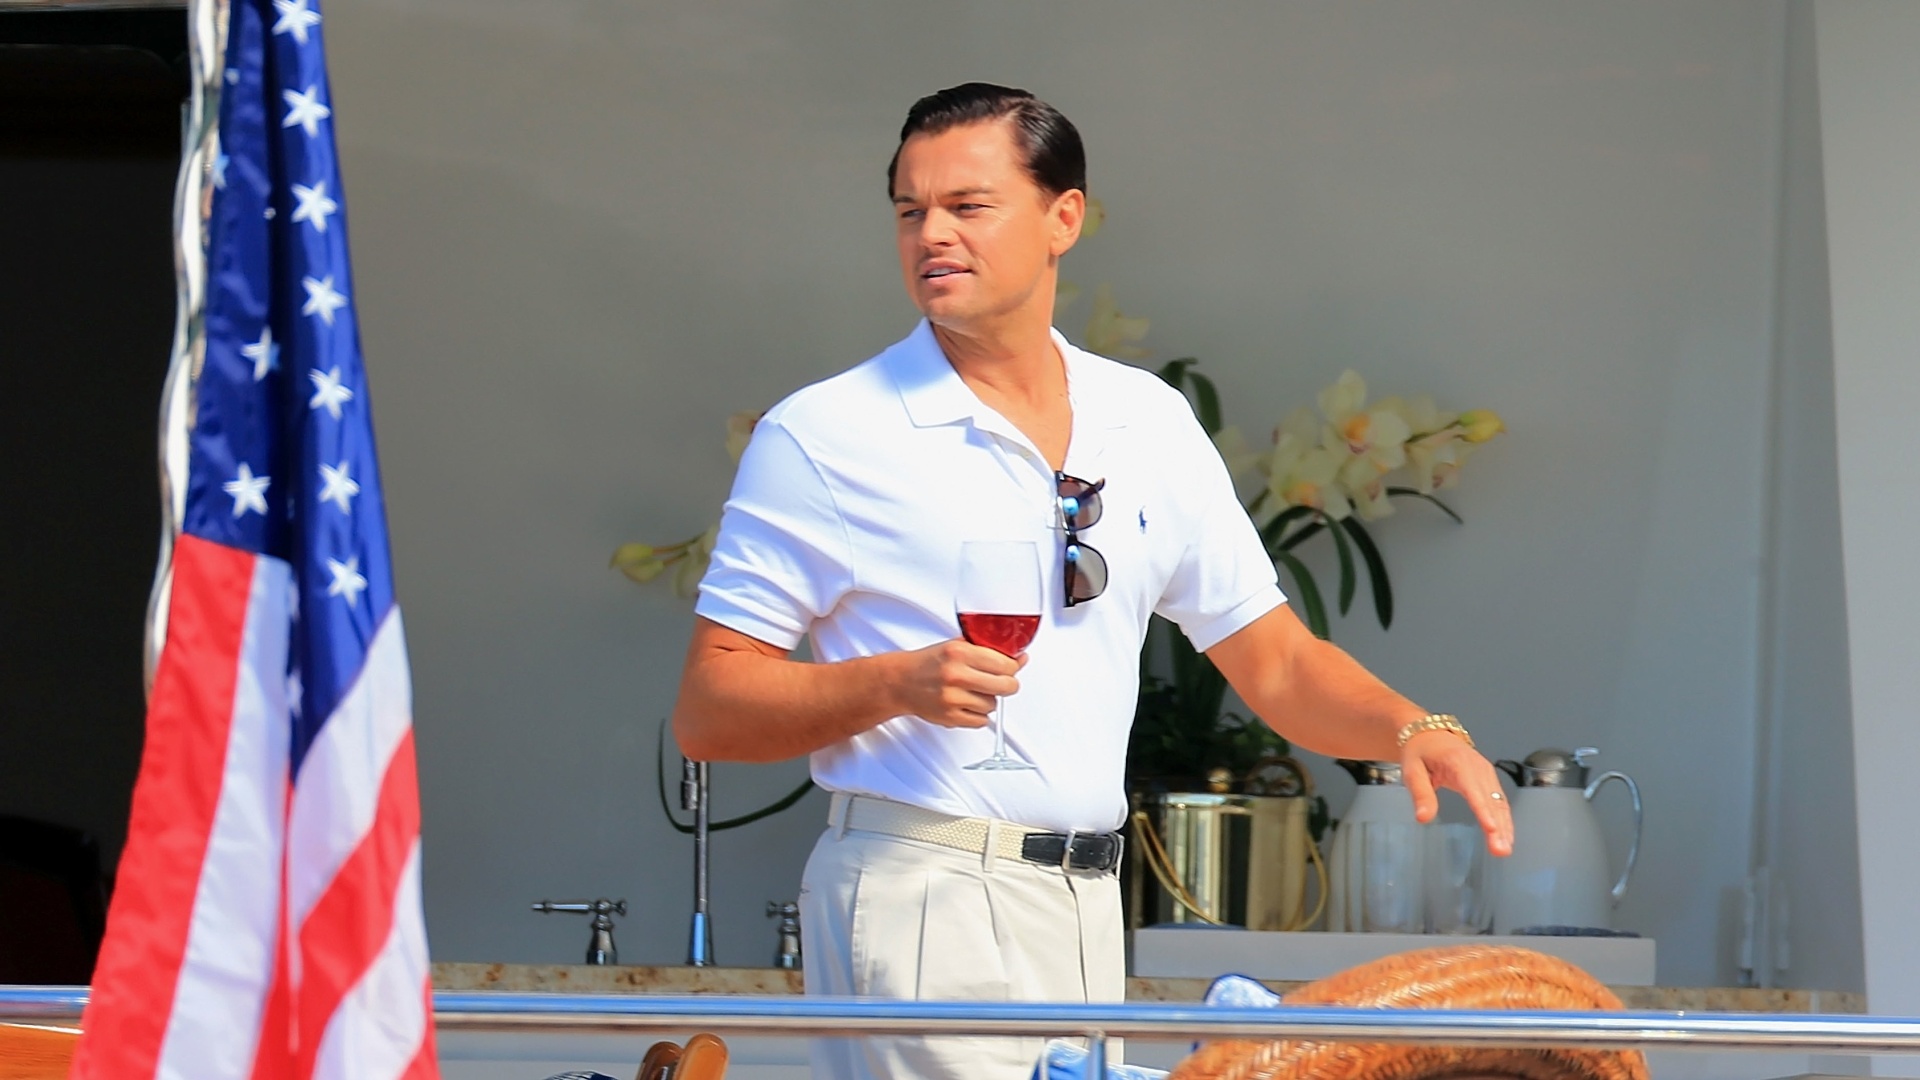 Review: ‘The Wolf of Wall Street’ Offers High Finance, High Style and Low Behavior